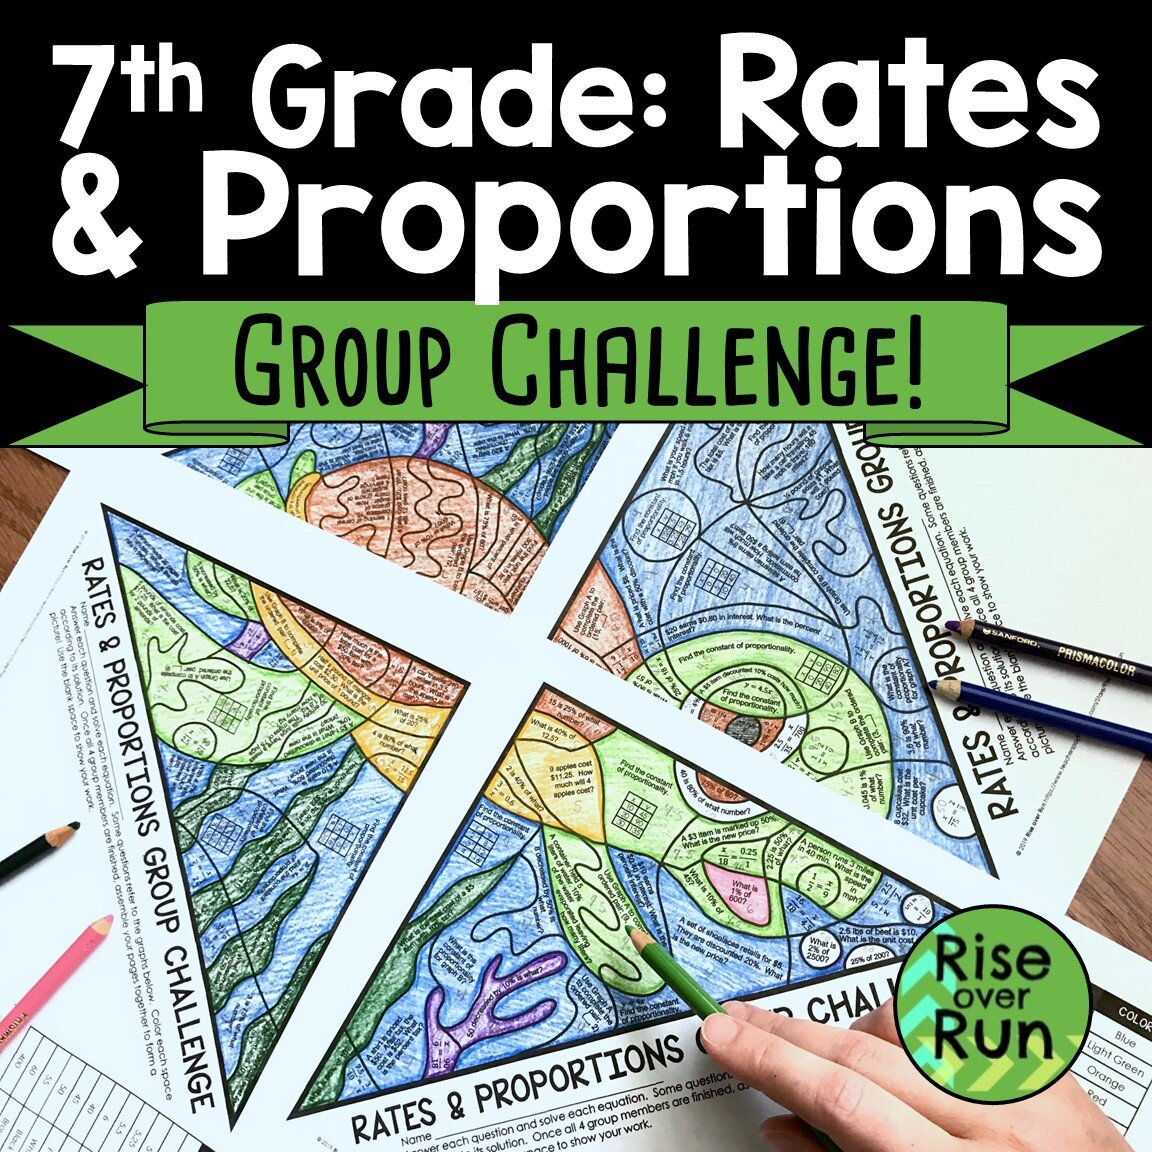 Rates &amp; Proportions Group Challenge